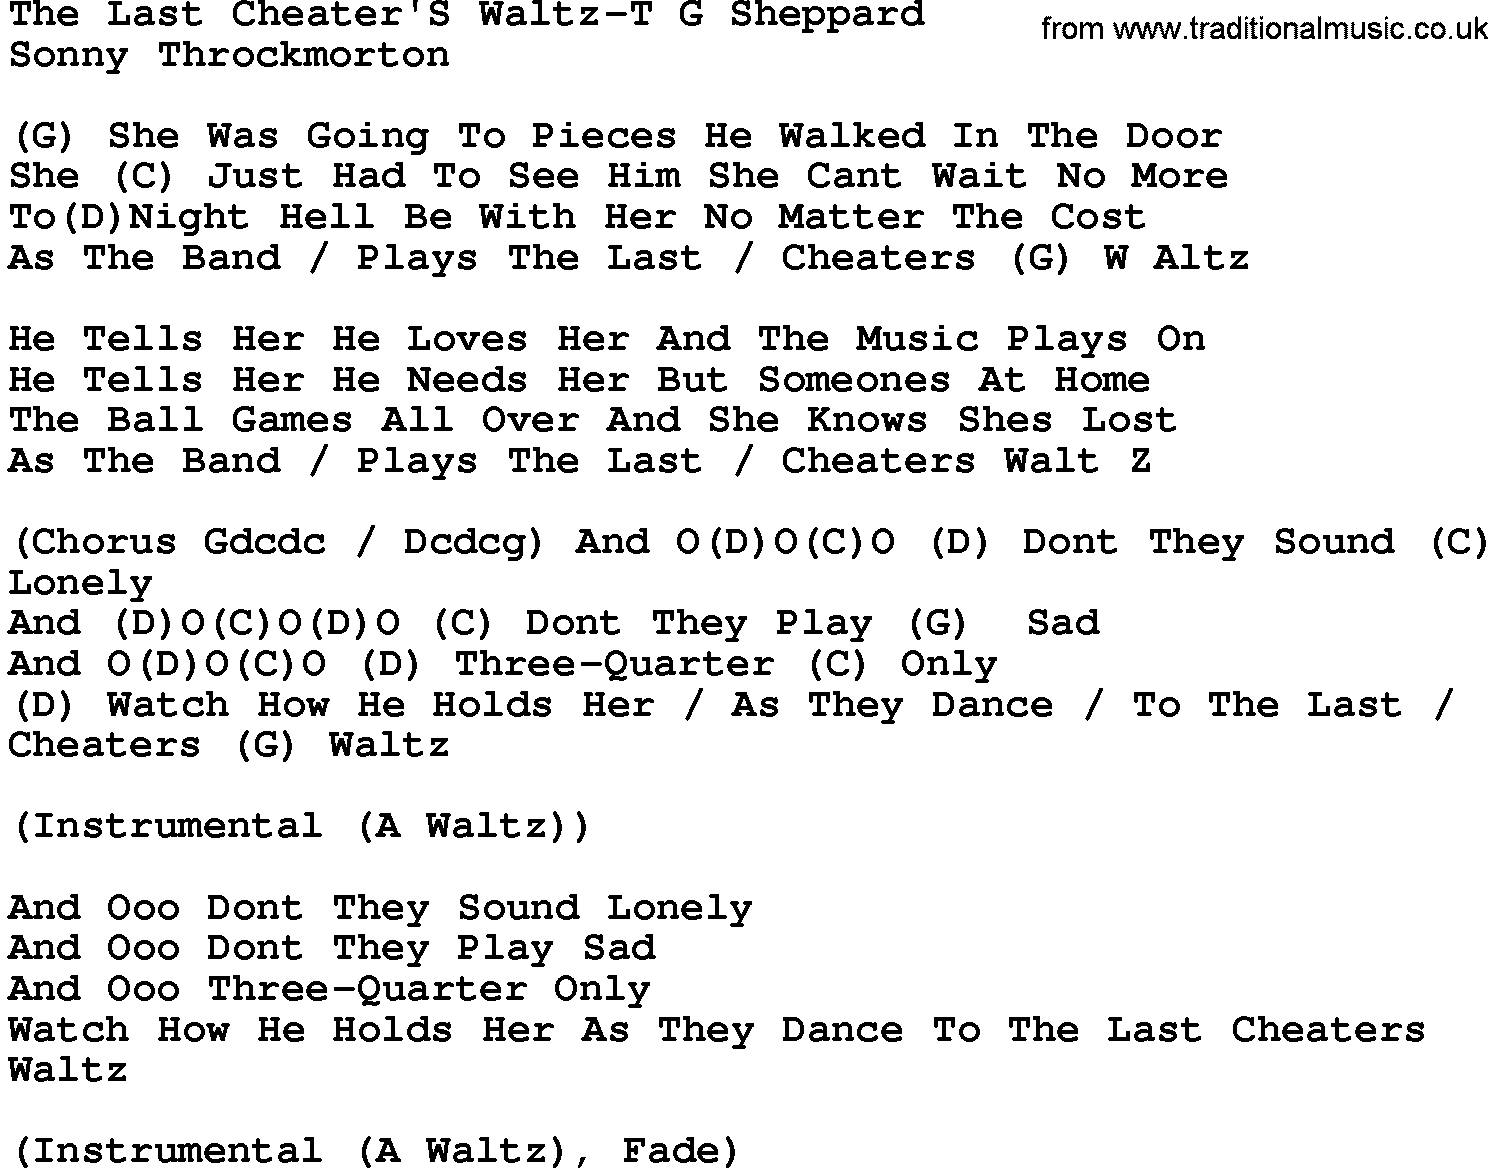 Country music song: The Last Cheater's Waltz-T G Sheppard lyrics and chords